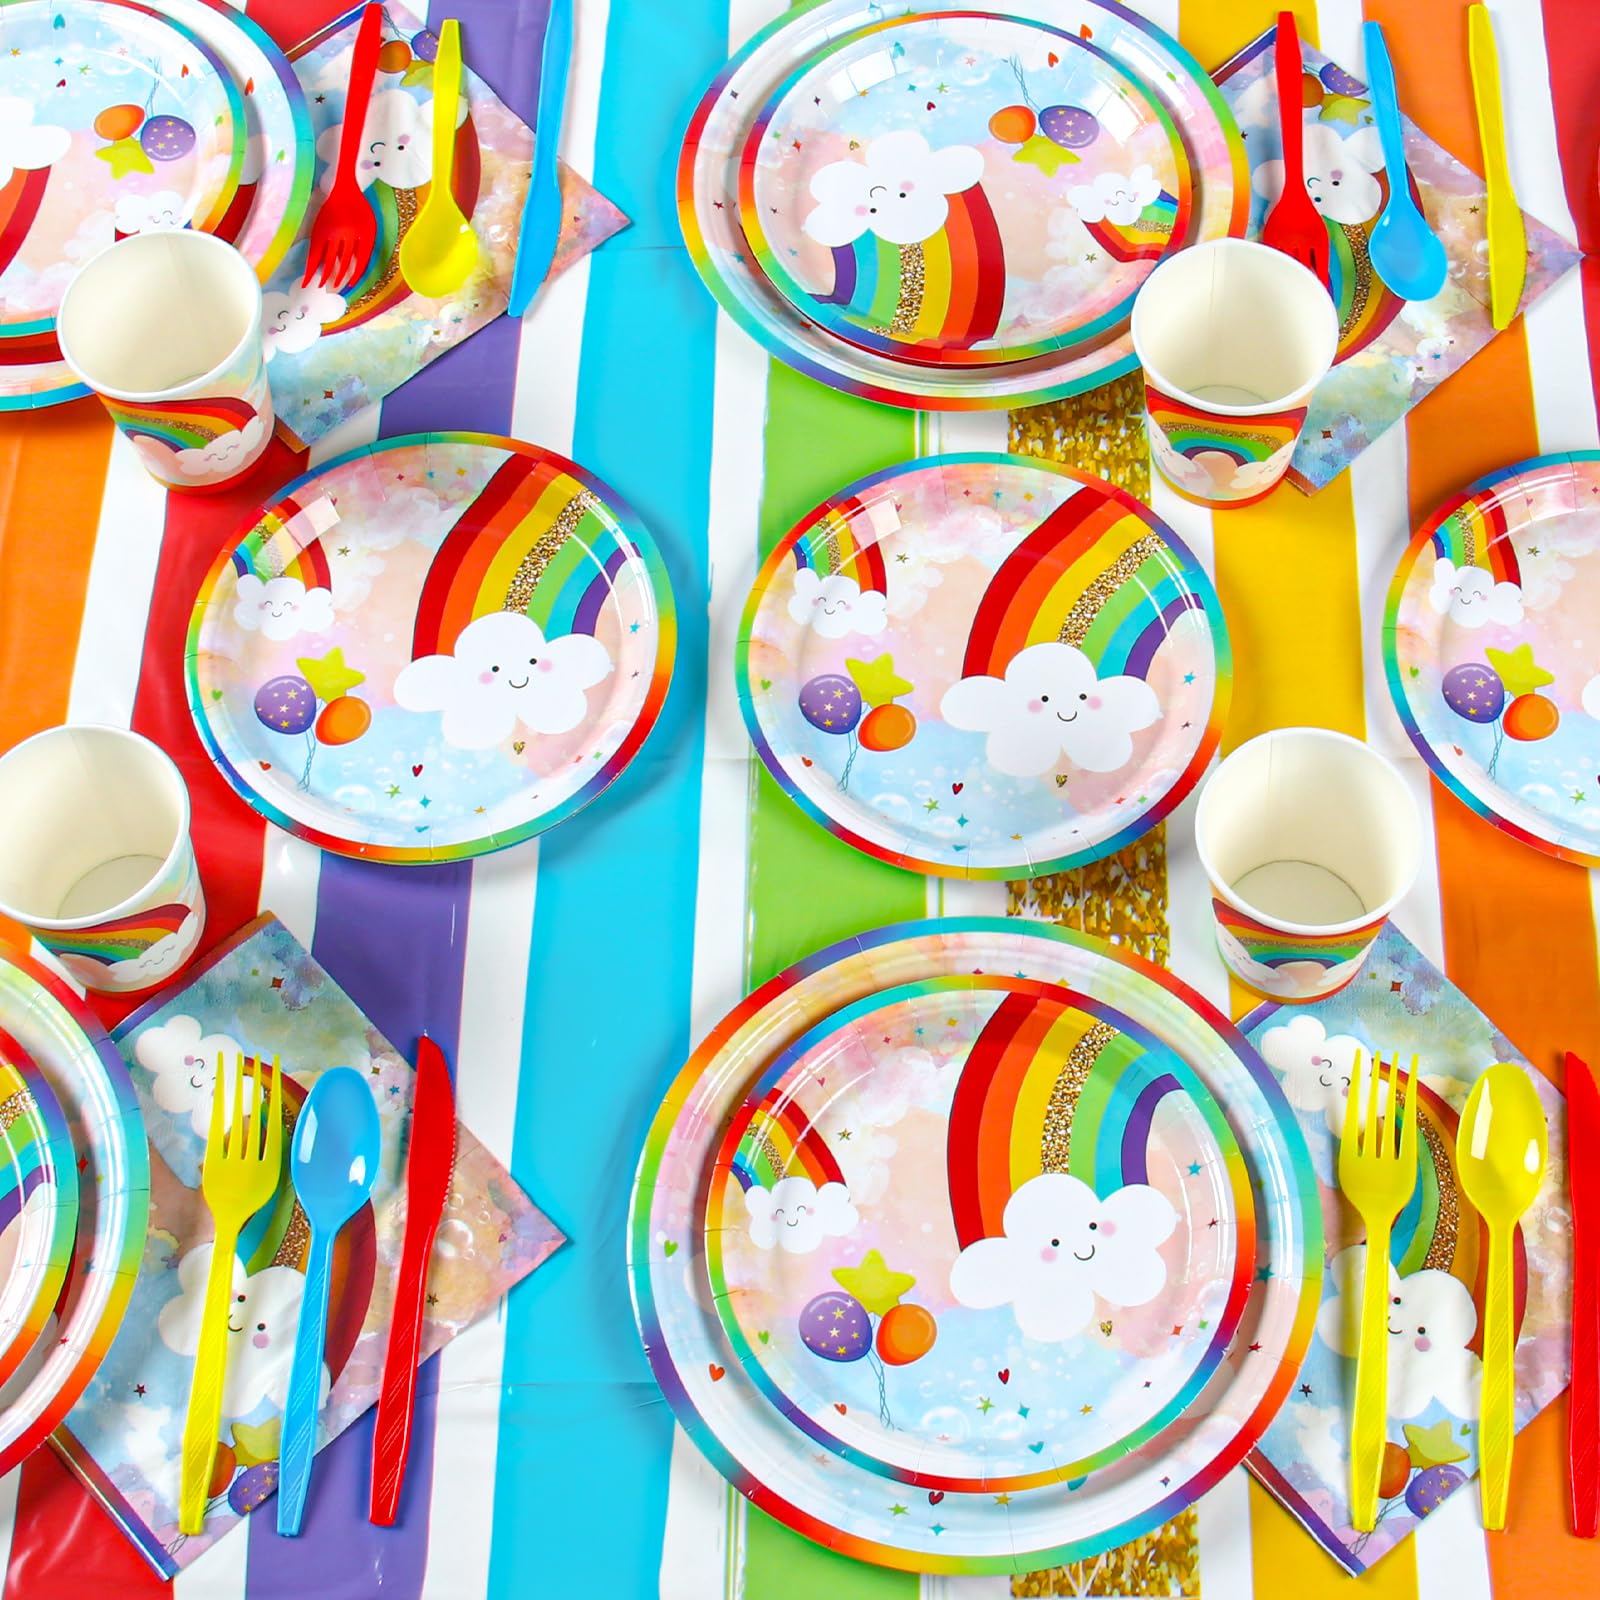 Rainbow Party Supplies, Happy Birthday Decorations for Girls & Boys -169pcs Rainbow Party Tableware Set Include 9" and 7" Party Plates and Napkins Cups Utensils with Tablecloth for 24 Guests